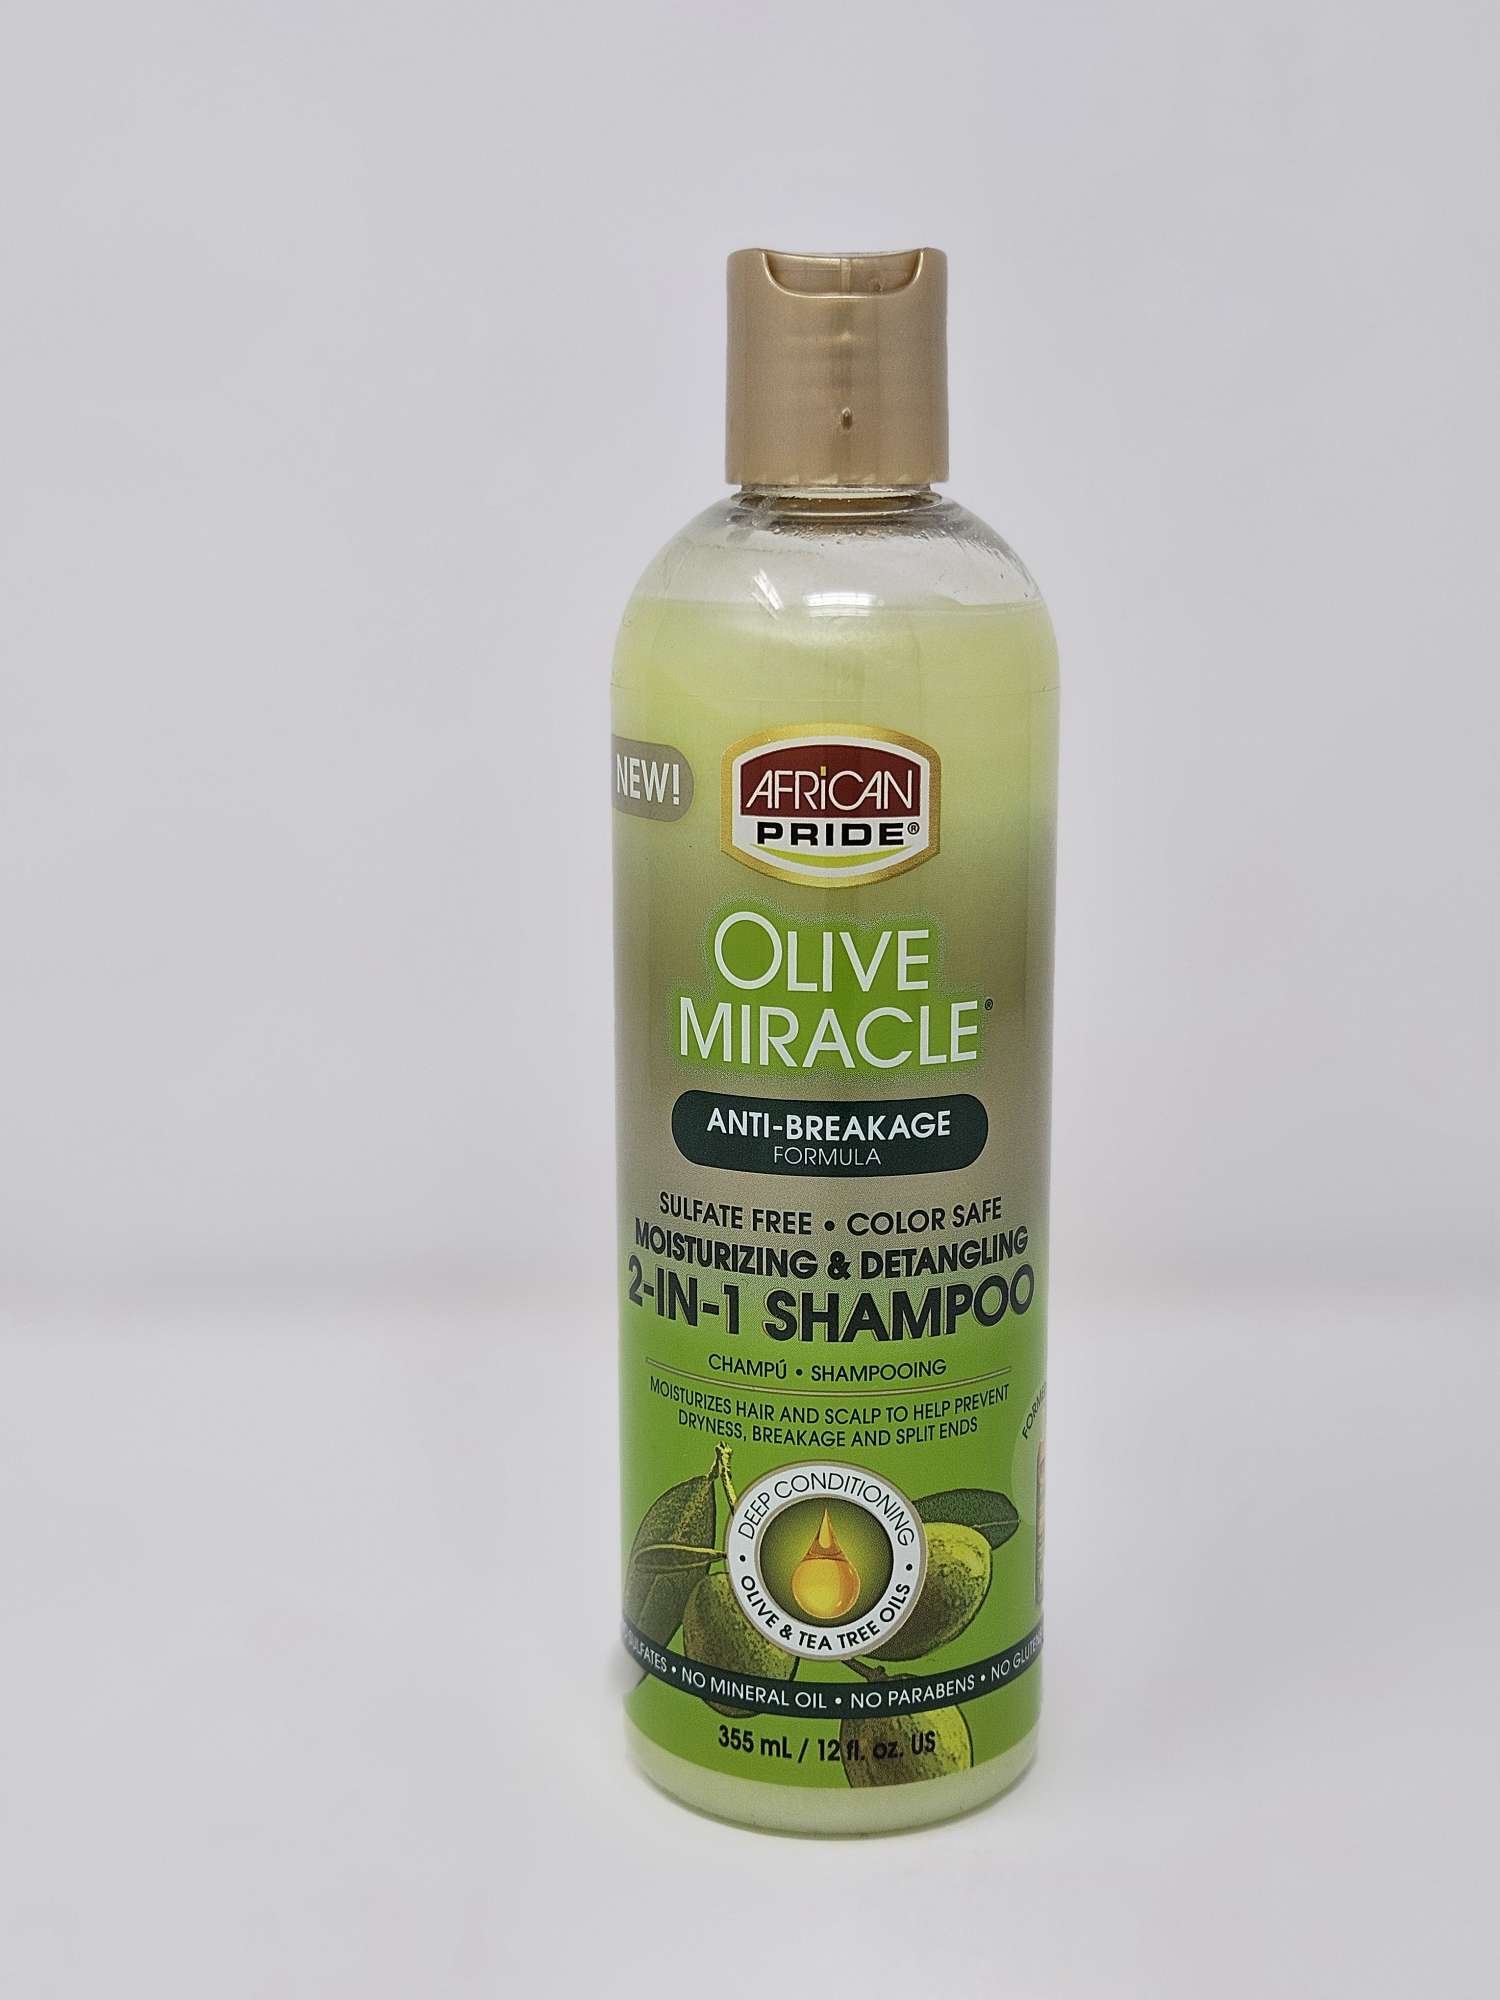 African Pride Olive Miracle Moisturizing & Detangling 2-In-1 Shampoo - 12oz